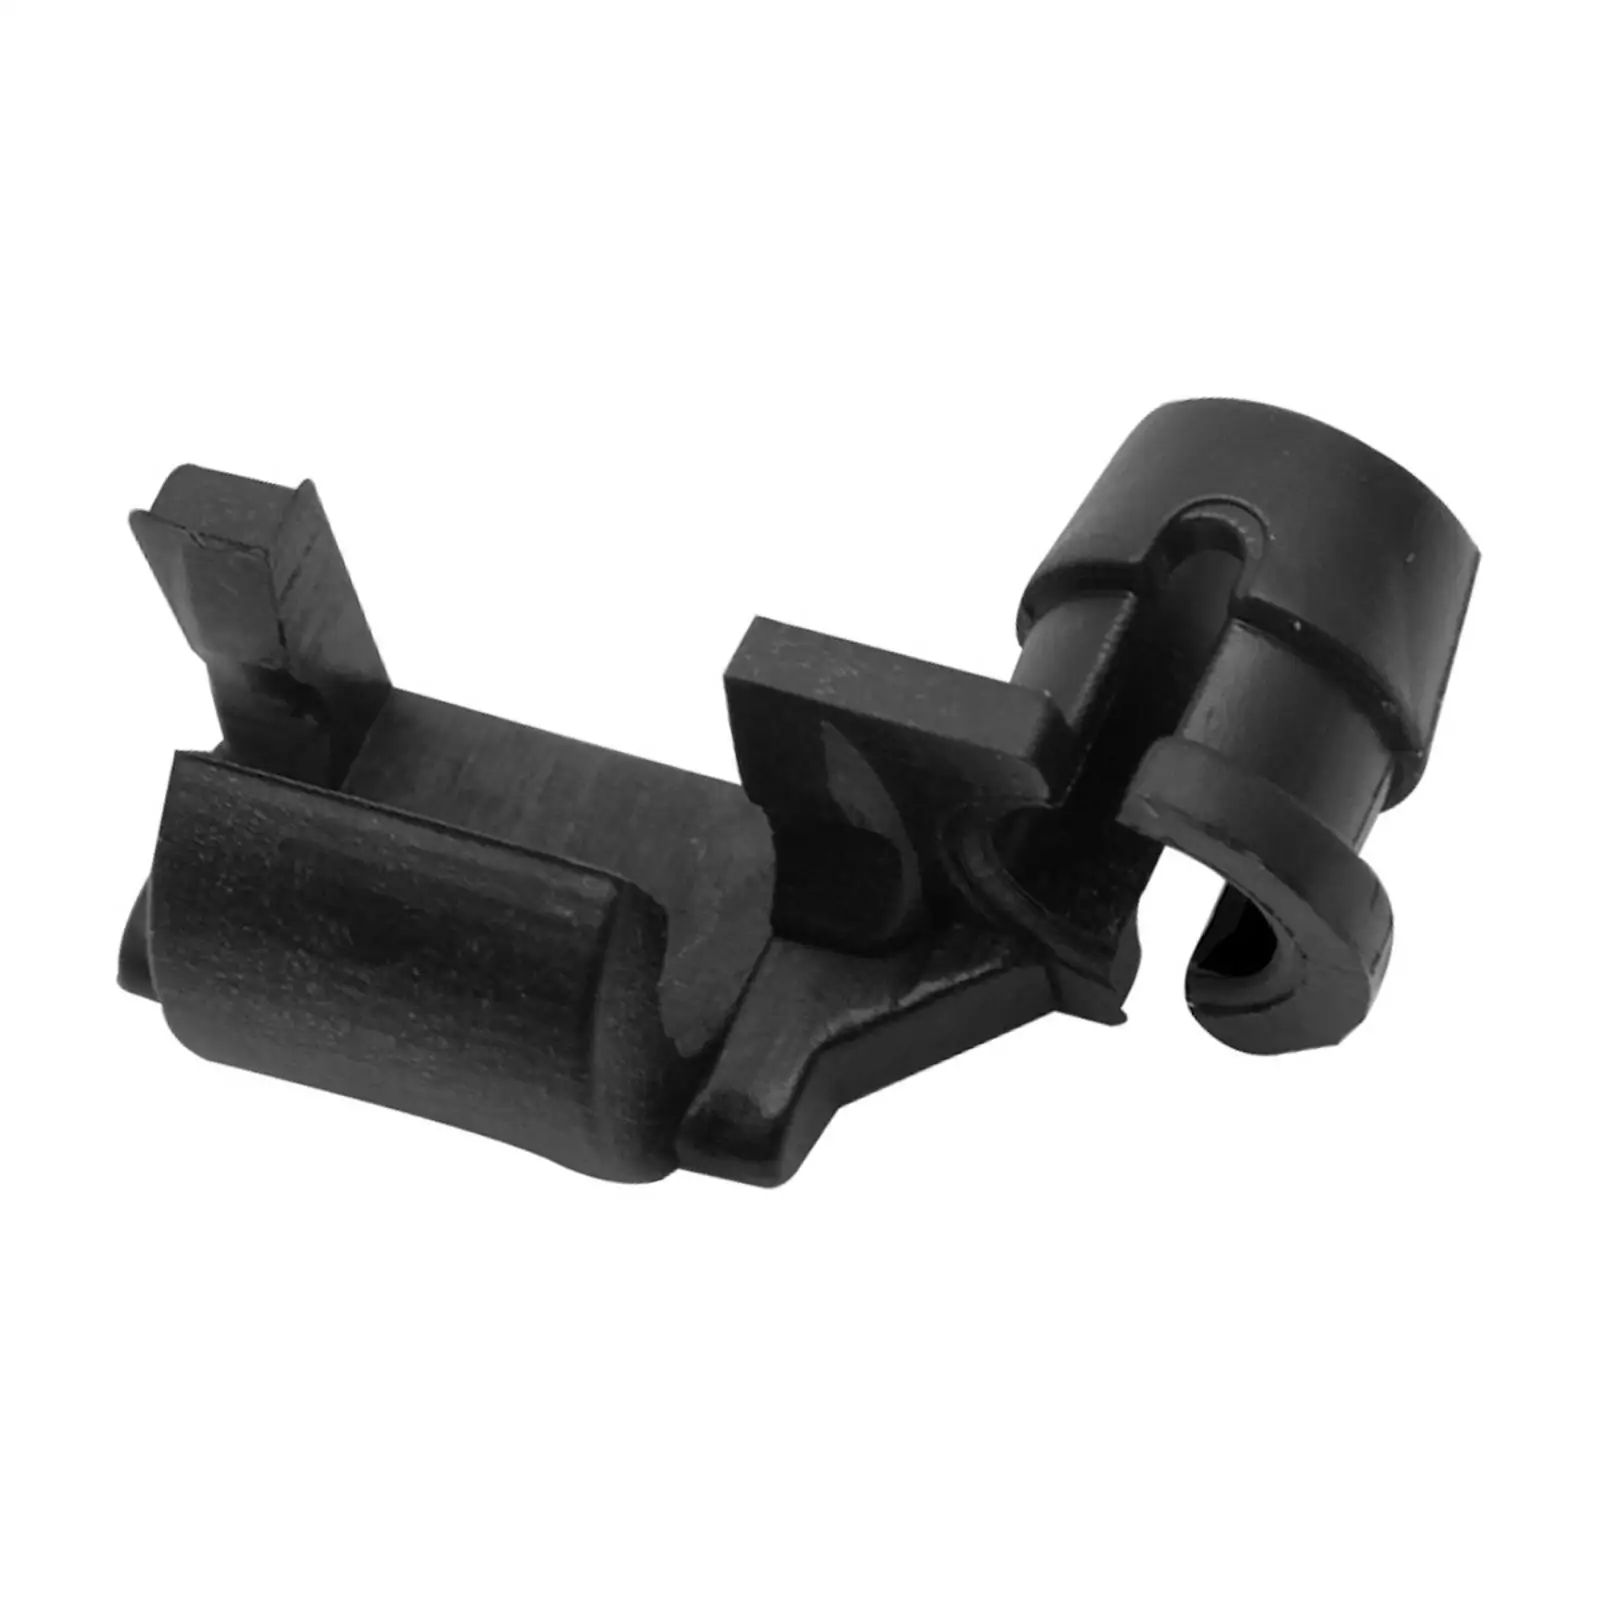 Boat Joint Link 6R5-41237-00 for Yamaha Outboard 4 Stroke 9.9HP-15HP Durable Black Vehicle Repair Parts Stable Performance